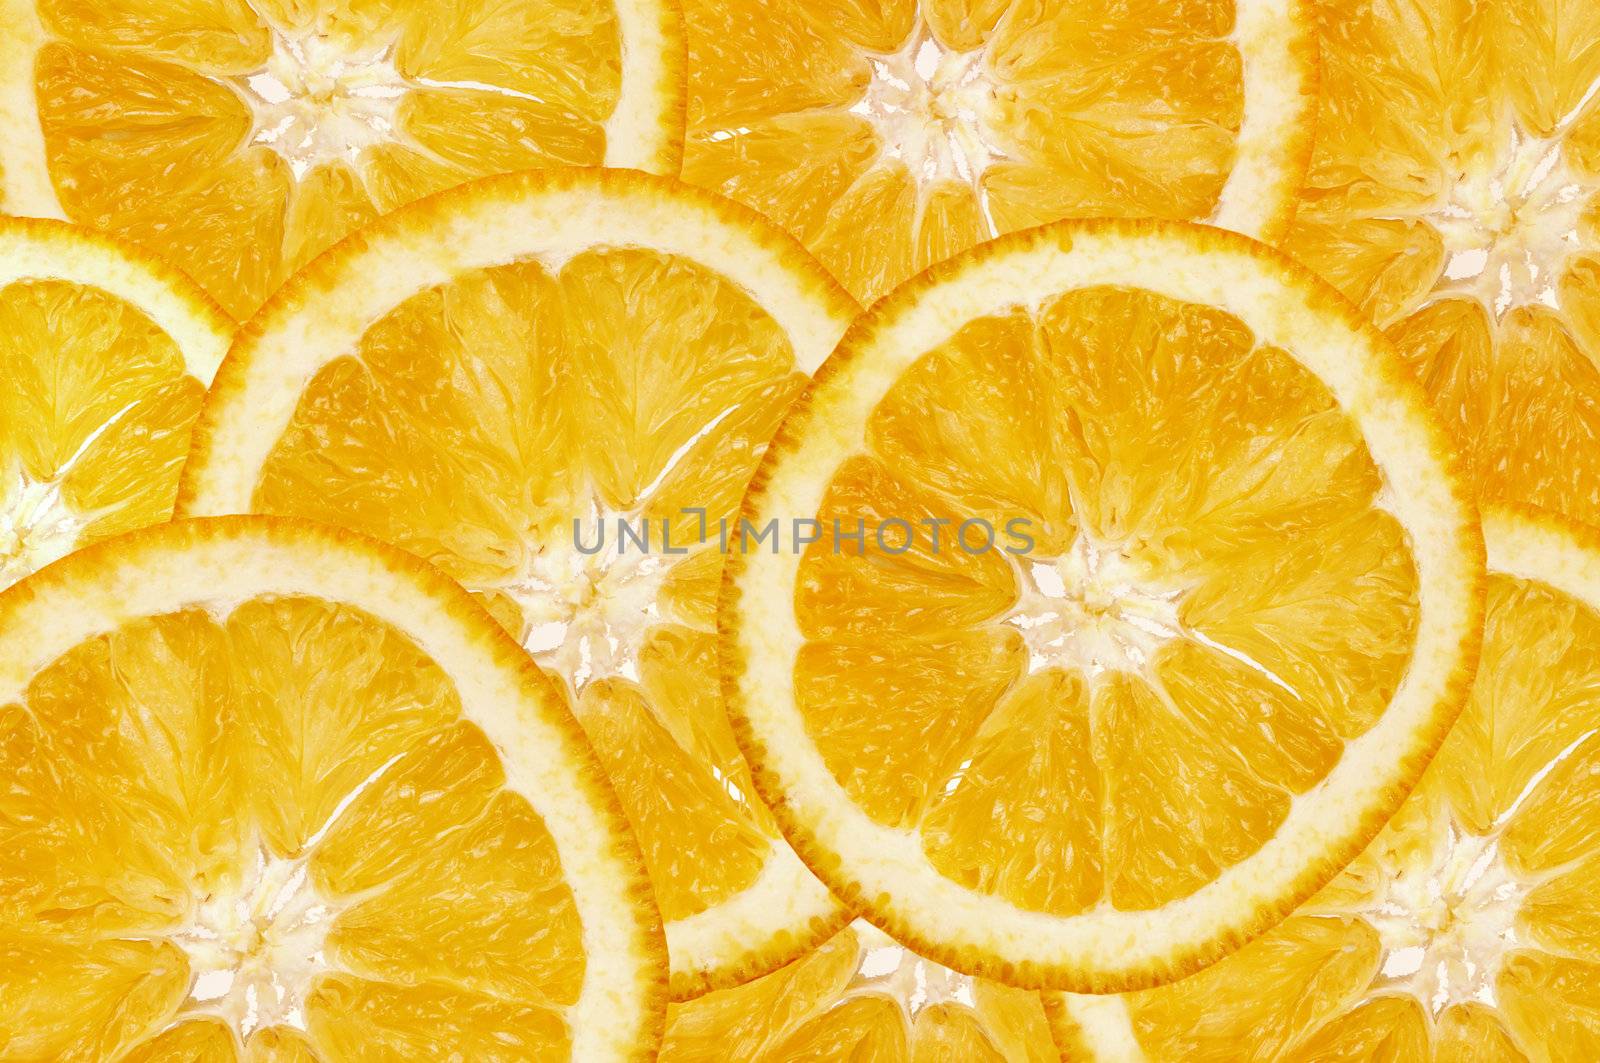 Detail of the slices of oranges